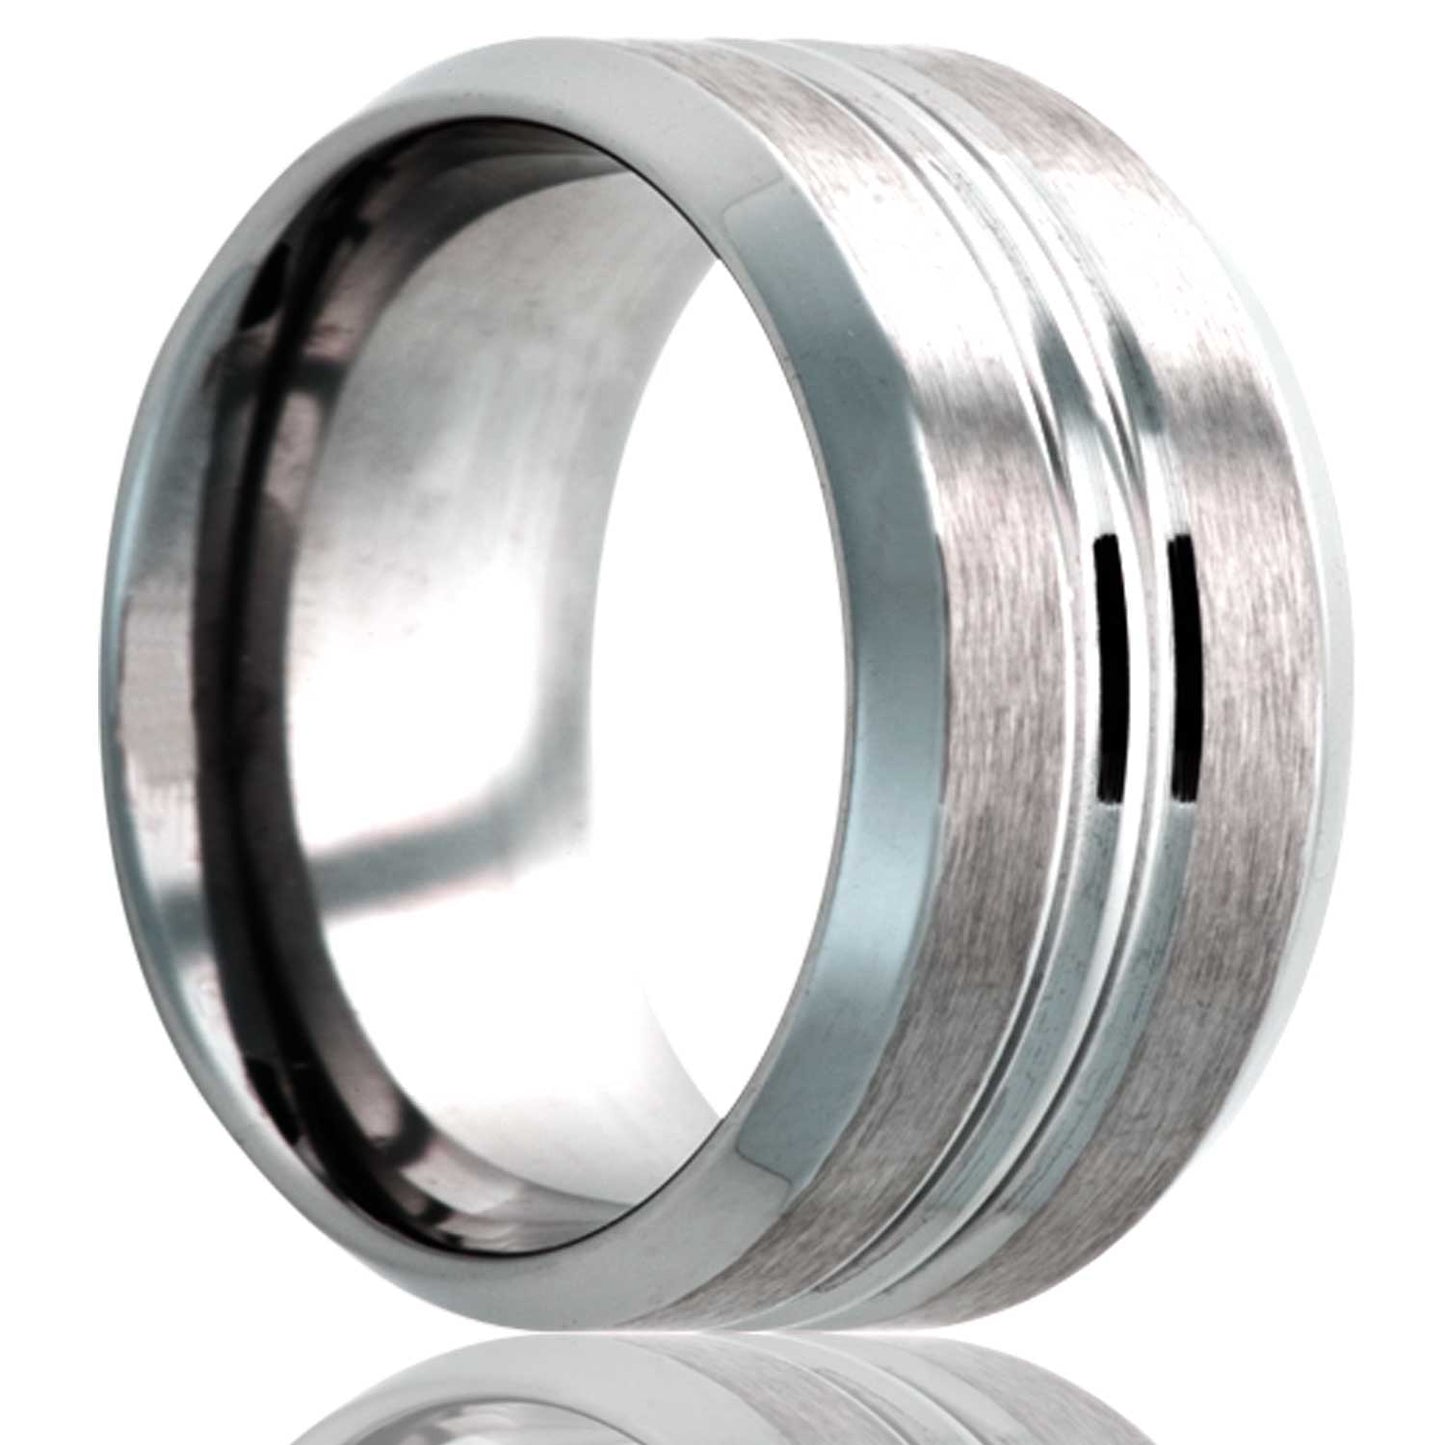 A satin finish grooved tungsten wedding band with beveled edges displayed on a neutral white background.